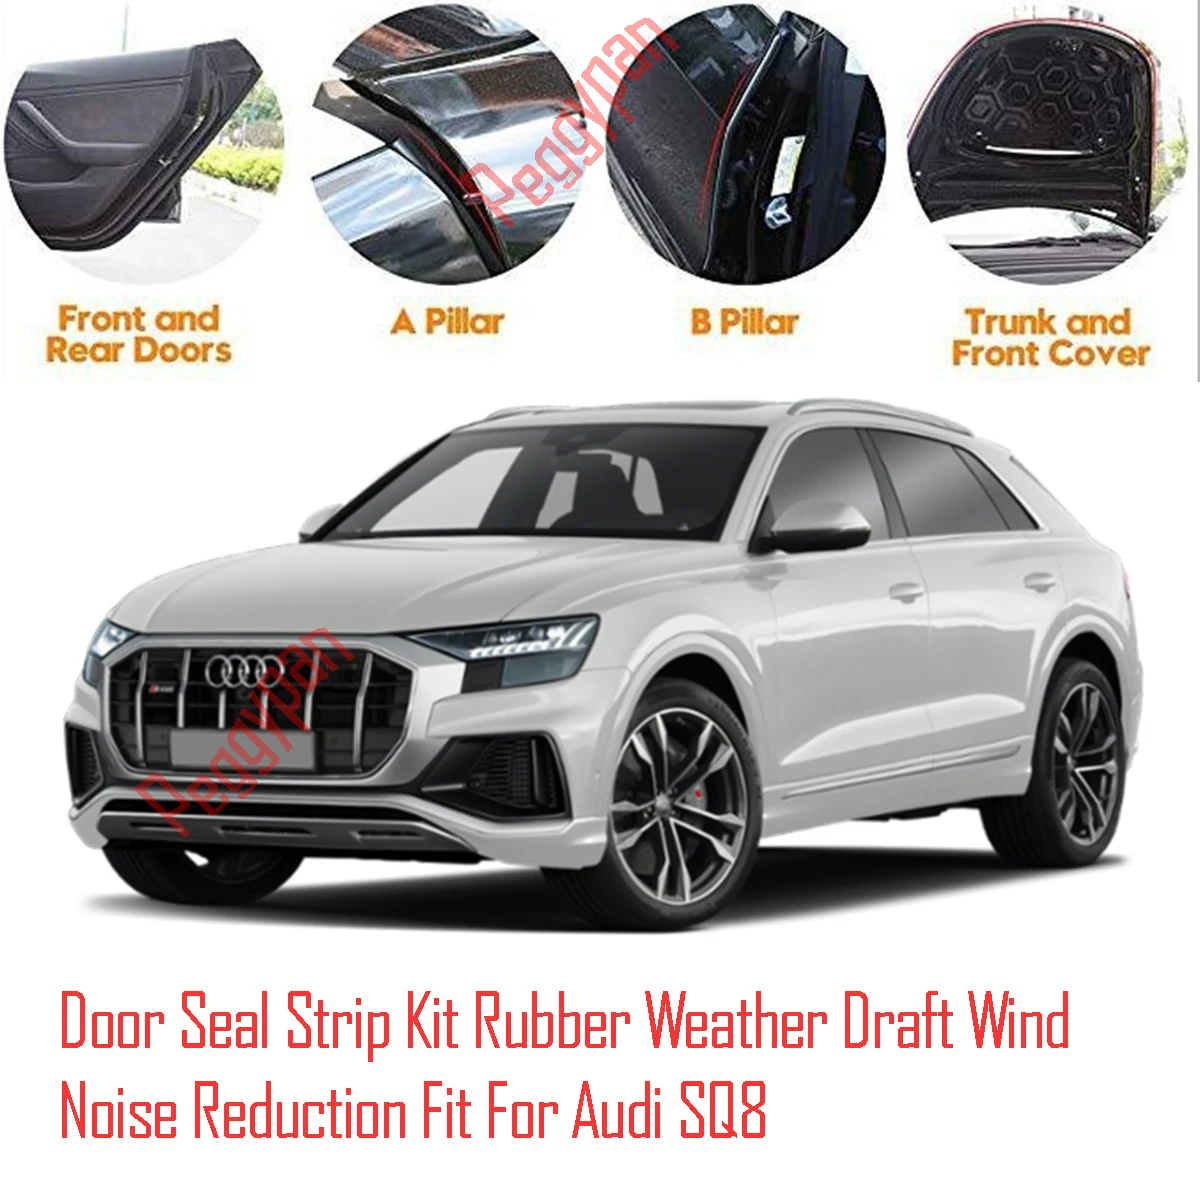 Door Seal Strip Kit Self Adhesive Window Engine Cover Soundproof Rubber Weather Draft Wind Noise Reduction Fit For Audi SQ8